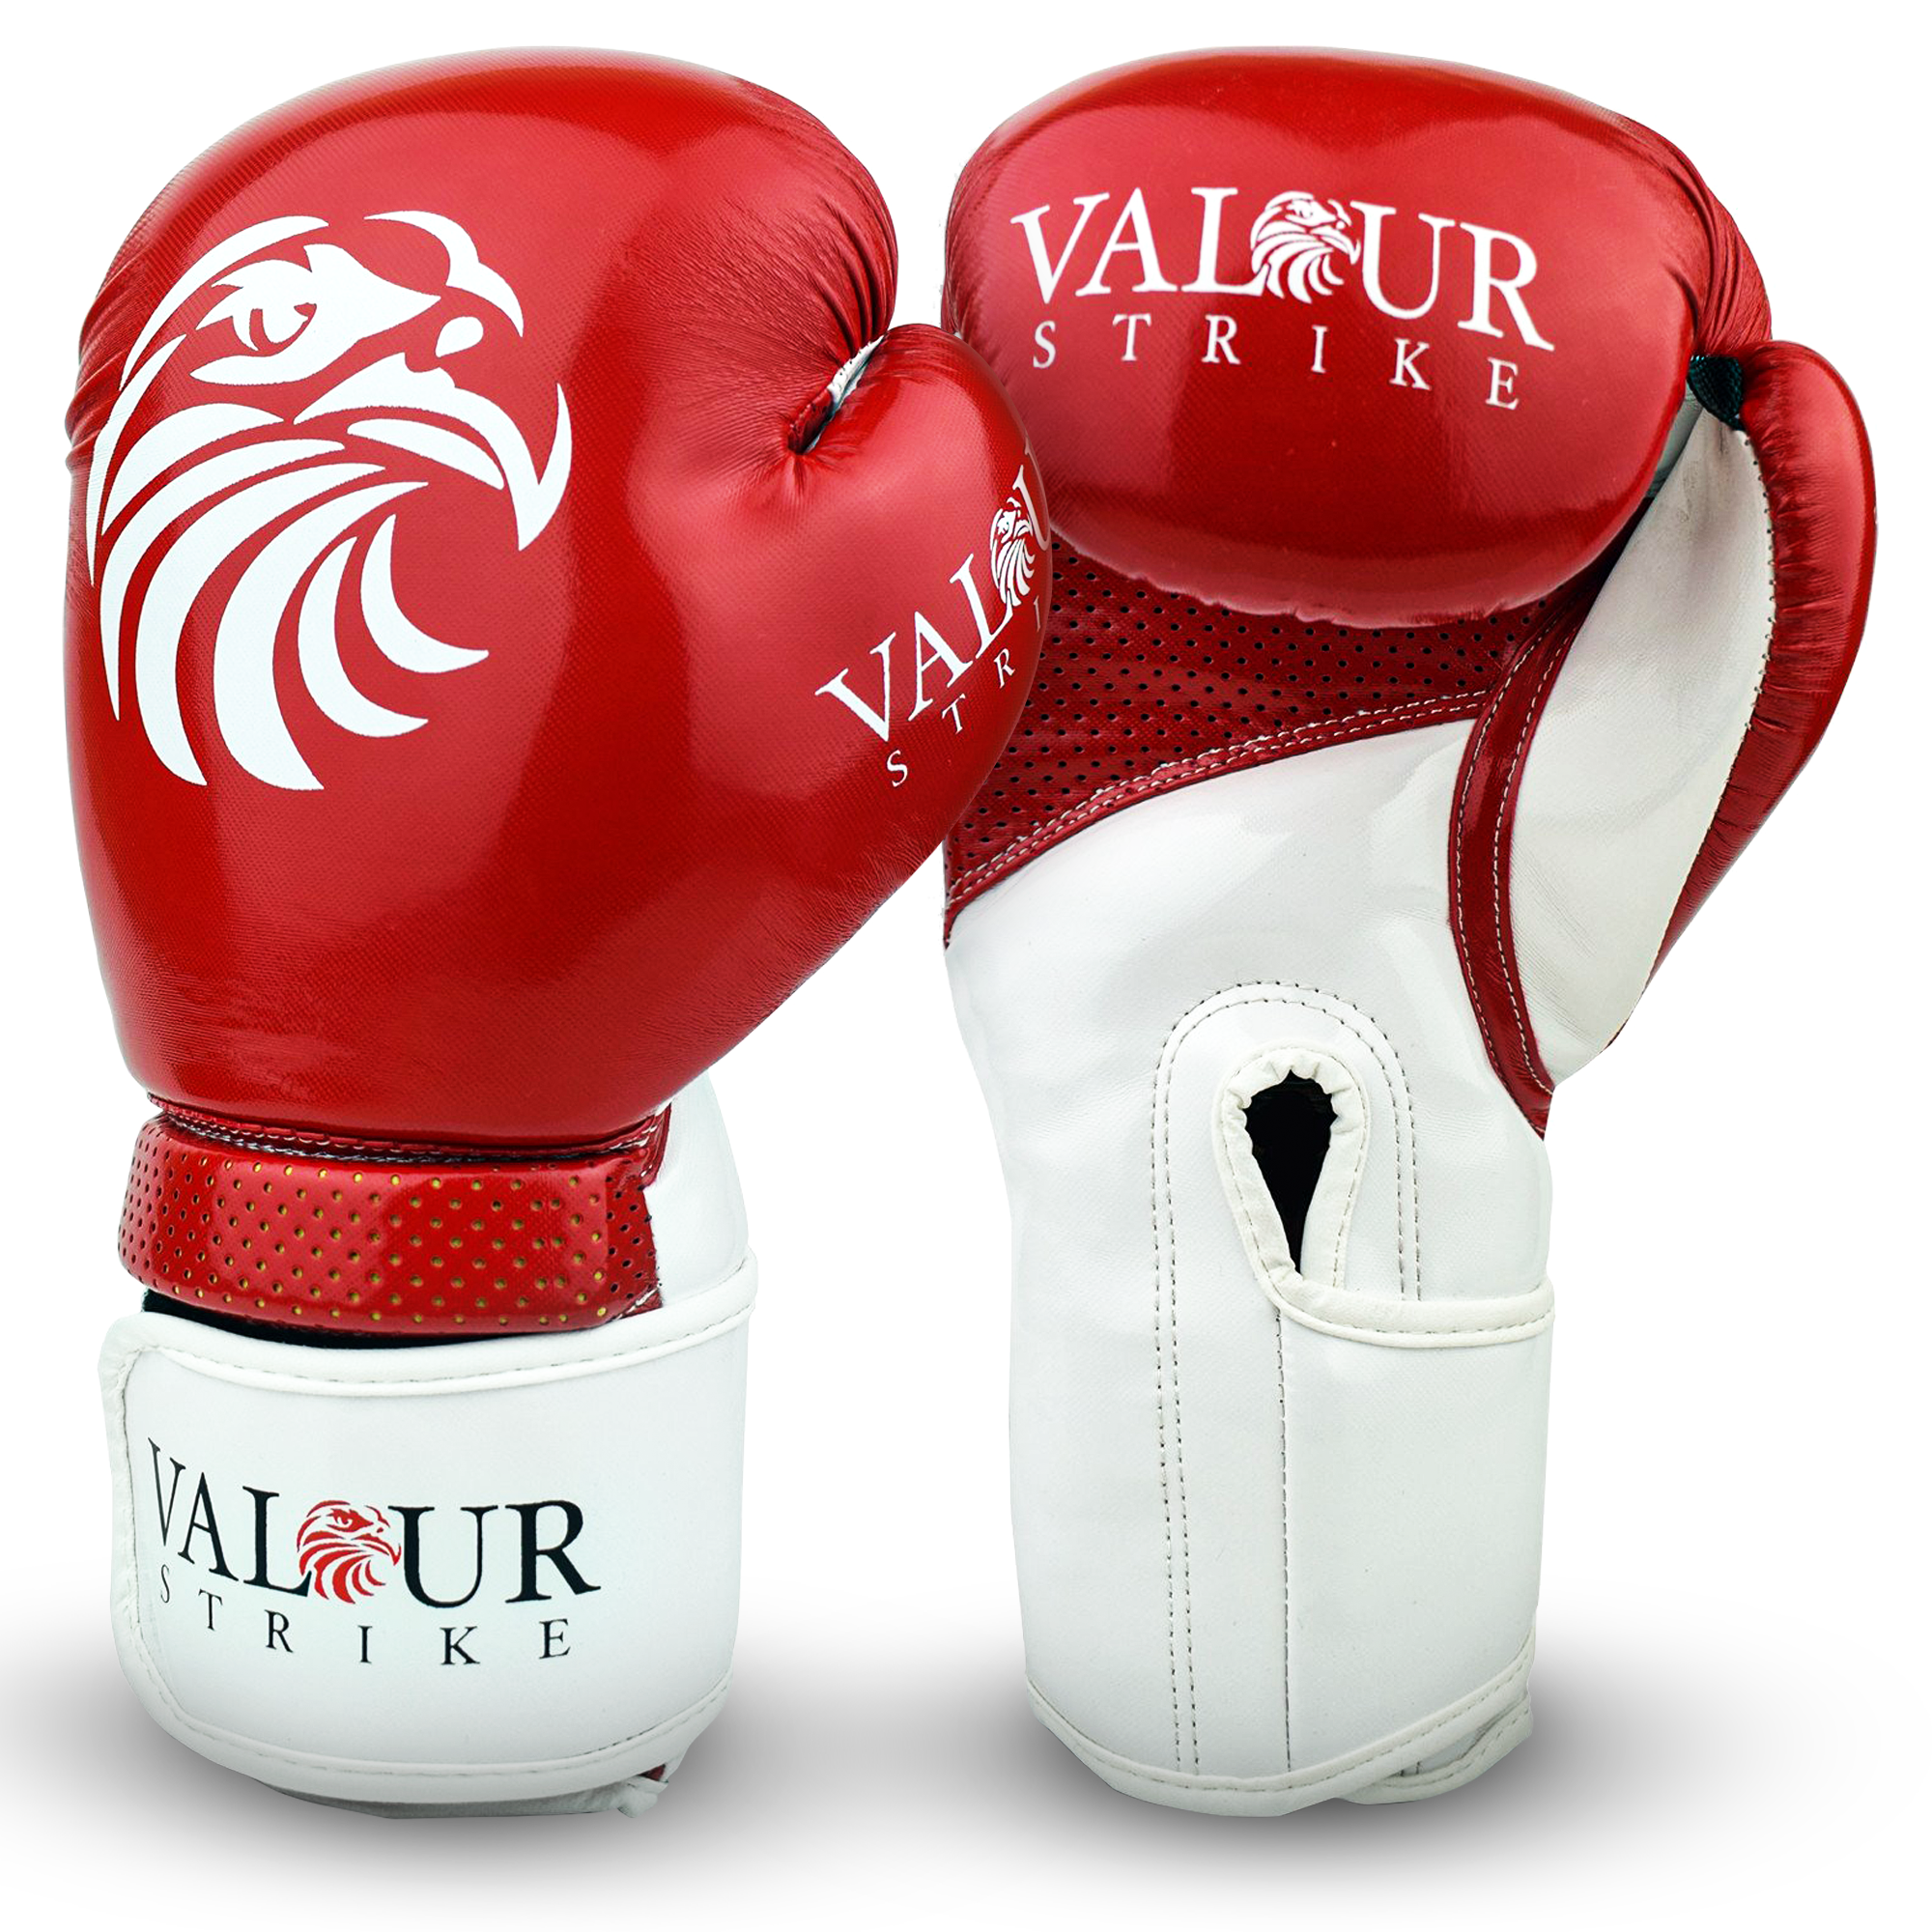 Red boxing gloves by valour strike